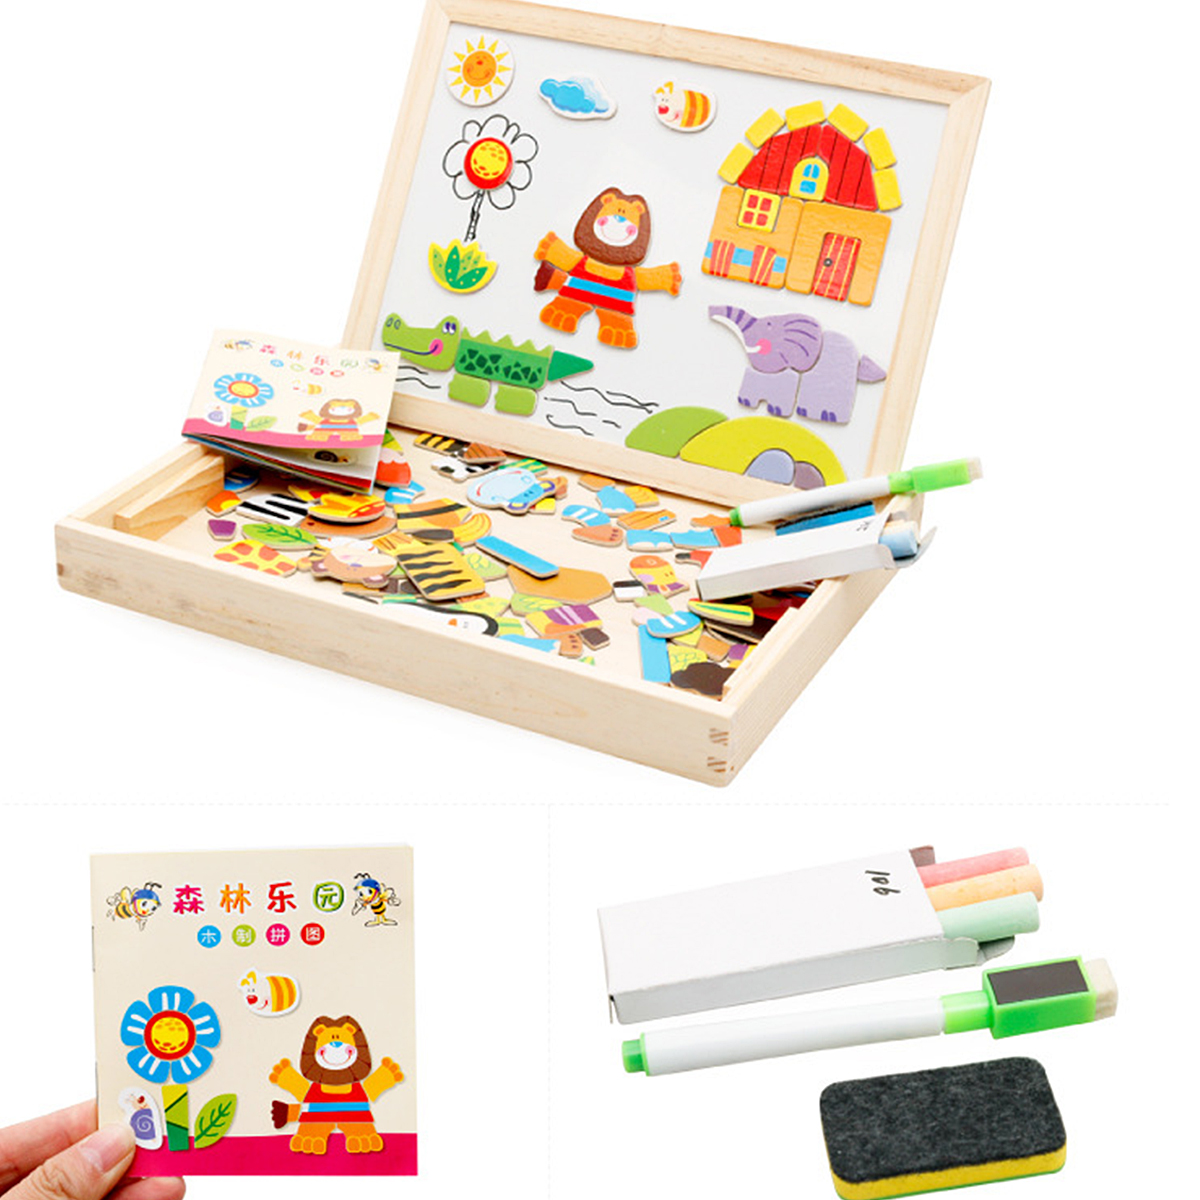 Wooden-DIY-Magnetic-Drawing-Board-Forest-Paradise-Childrens-Early-Educational-Learning-Toys-1676971-3